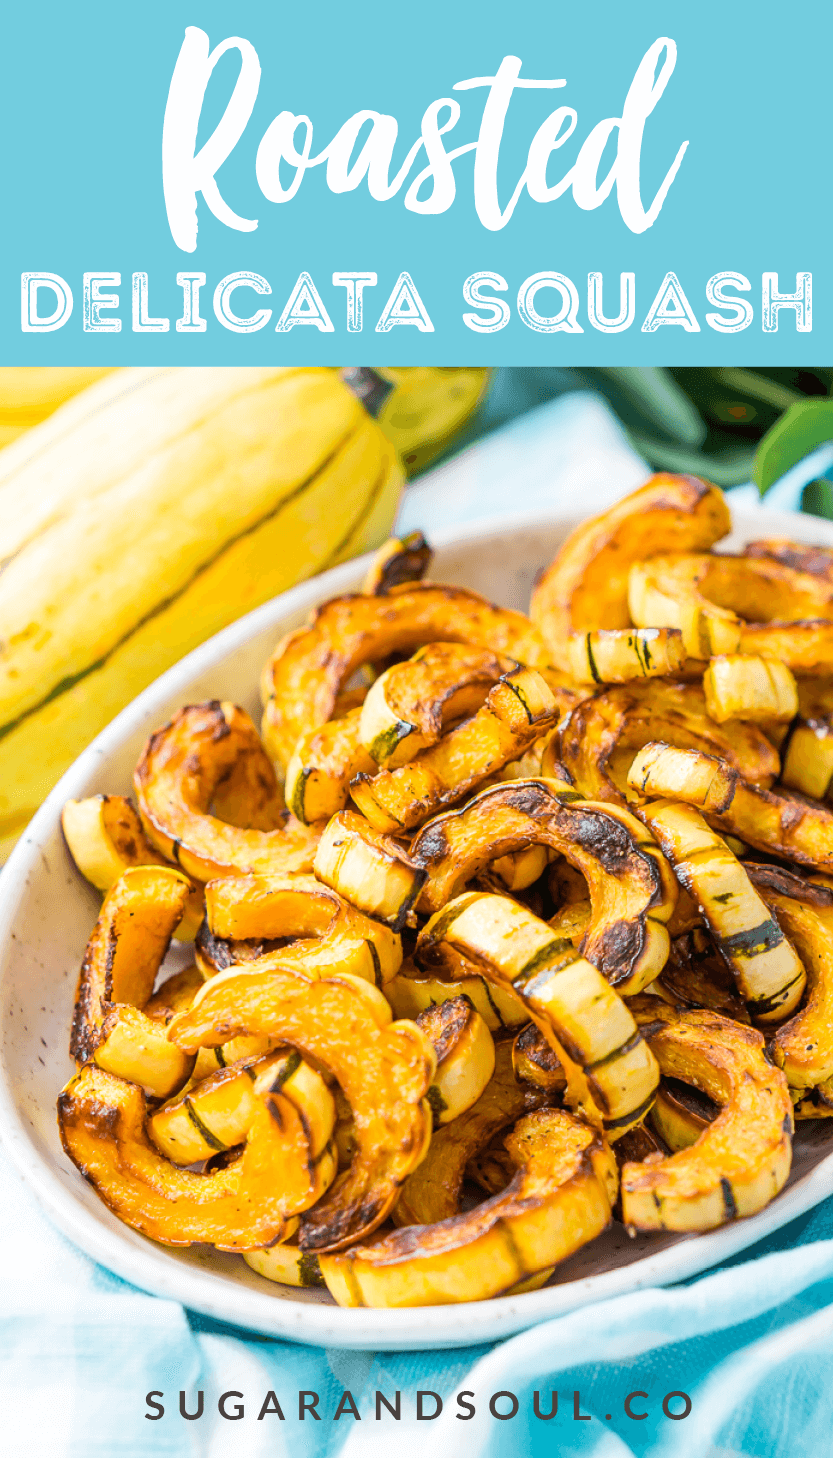 Delicata Squash is a small, easy to cook squash that's sweet and tender and doesn't require peeling because you can eat the skin! Roast it with salt, pepper, and olive oil or cinnamon, brown sugar, and coconut oil for an even sweeter side dish! via @sugarandsoulco